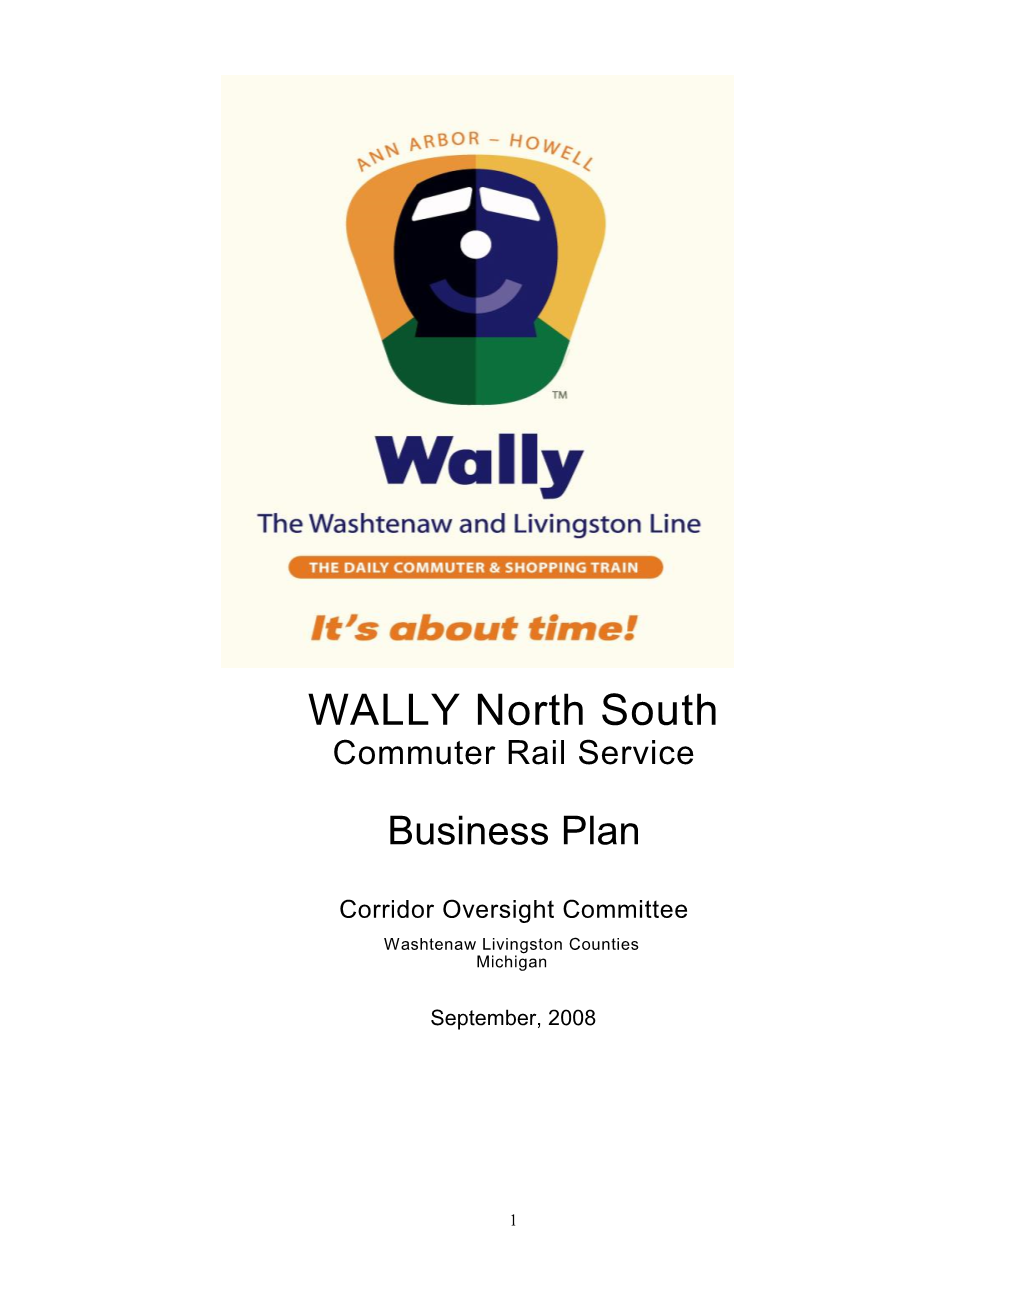 WALLY North South Commuter Rail Service